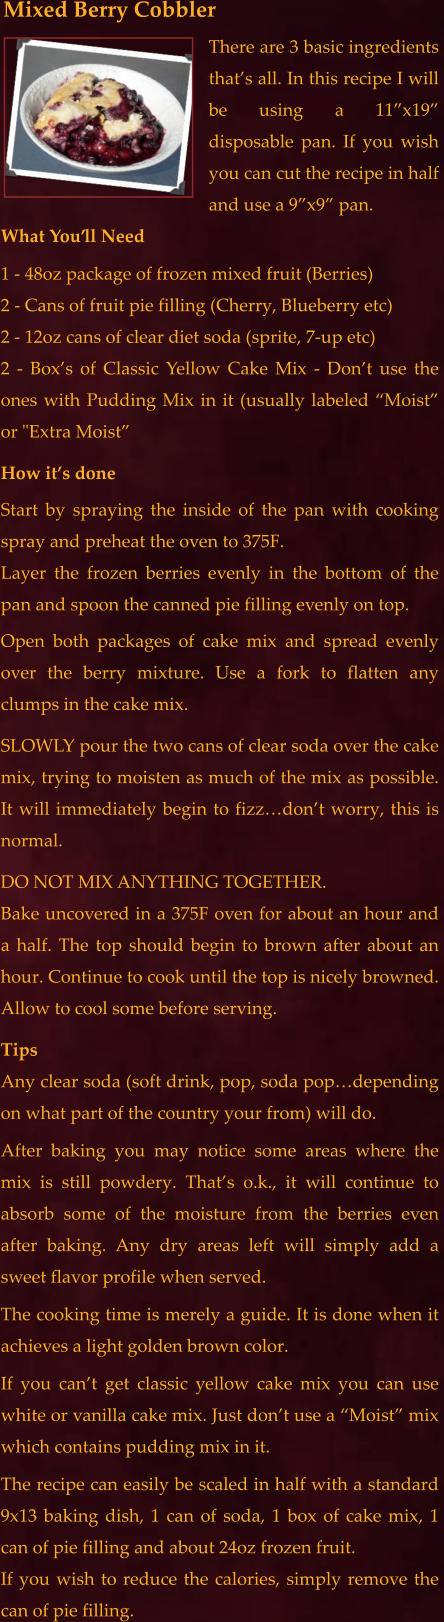 There are 3 basic ingredients that’s all. In this recipe I will be using a 11”x19” disposable pan. If you wish you can cut the recipe in half and use a 9”x9” pan.  What You’ll Need 1 - 48oz package of frozen mixed fruit (Berries) 2 - Cans of fruit pie filling (Cherry, Blueberry etc) 2 - 12oz cans of clear diet soda (sprite, 7-up etc) 2 - Box’s of Classic Yellow Cake Mix - Don’t use the ones with Pudding Mix in it (usually labeled “Moist” or "Extra Moist” How it’s done Start by spraying the inside of the pan with cooking spray and preheat the oven to 375F.  Layer the frozen berries evenly in the bottom of the pan and spoon the canned pie filling evenly on top. Open both packages of cake mix and spread evenly over the berry mixture. Use a fork to flatten any clumps in the cake mix. SLOWLY pour the two cans of clear soda over the cake mix, trying to moisten as much of the mix as possible.  It will immediately begin to fizz…don’t worry, this is normal. DO NOT MIX ANYTHING TOGETHER.  Bake uncovered in a 375F oven for about an hour and a half. The top should begin to brown after about an hour. Continue to cook until the top is nicely browned. Allow to cool some before serving. Tips Any clear soda (soft drink, pop, soda pop…depending on what part of the country your from) will do.  After baking you may notice some areas where the mix is still powdery. That’s o.k., it will continue to absorb some of the moisture from the berries even after baking. Any dry areas left will simply add a sweet flavor profile when served. The cooking time is merely a guide. It is done when it achieves a light golden brown color.   If you can’t get classic yellow cake mix you can use white or vanilla cake mix. Just don’t use a “Moist” mix which contains pudding mix in it.  The recipe can easily be scaled in half with a standard 9x13 baking dish, 1 can of soda, 1 box of cake mix, 1 can of pie filling and about 24oz frozen fruit.  If you wish to reduce the calories, simply remove the can of pie filling. Mixed Berry Cobbler